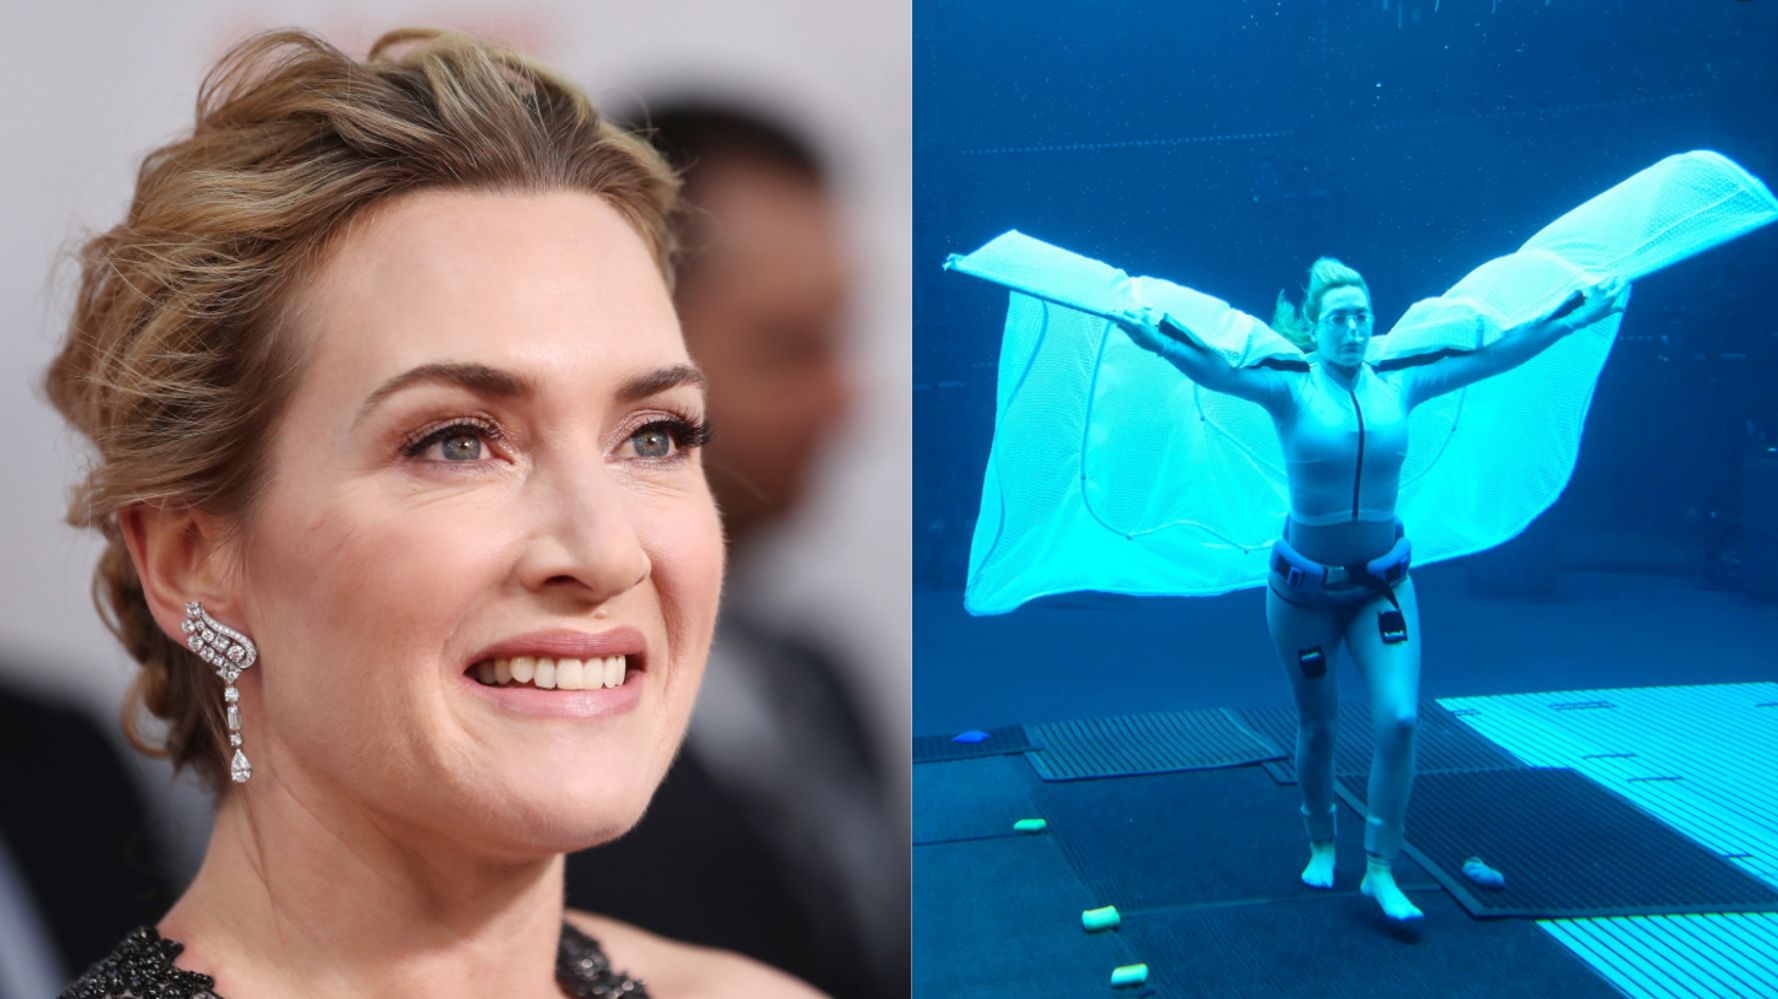 https://tickle.news/this-photo-of-kate-winslet-filming-avatar-2-underwater-will-make-you-take-a-deep-breath/